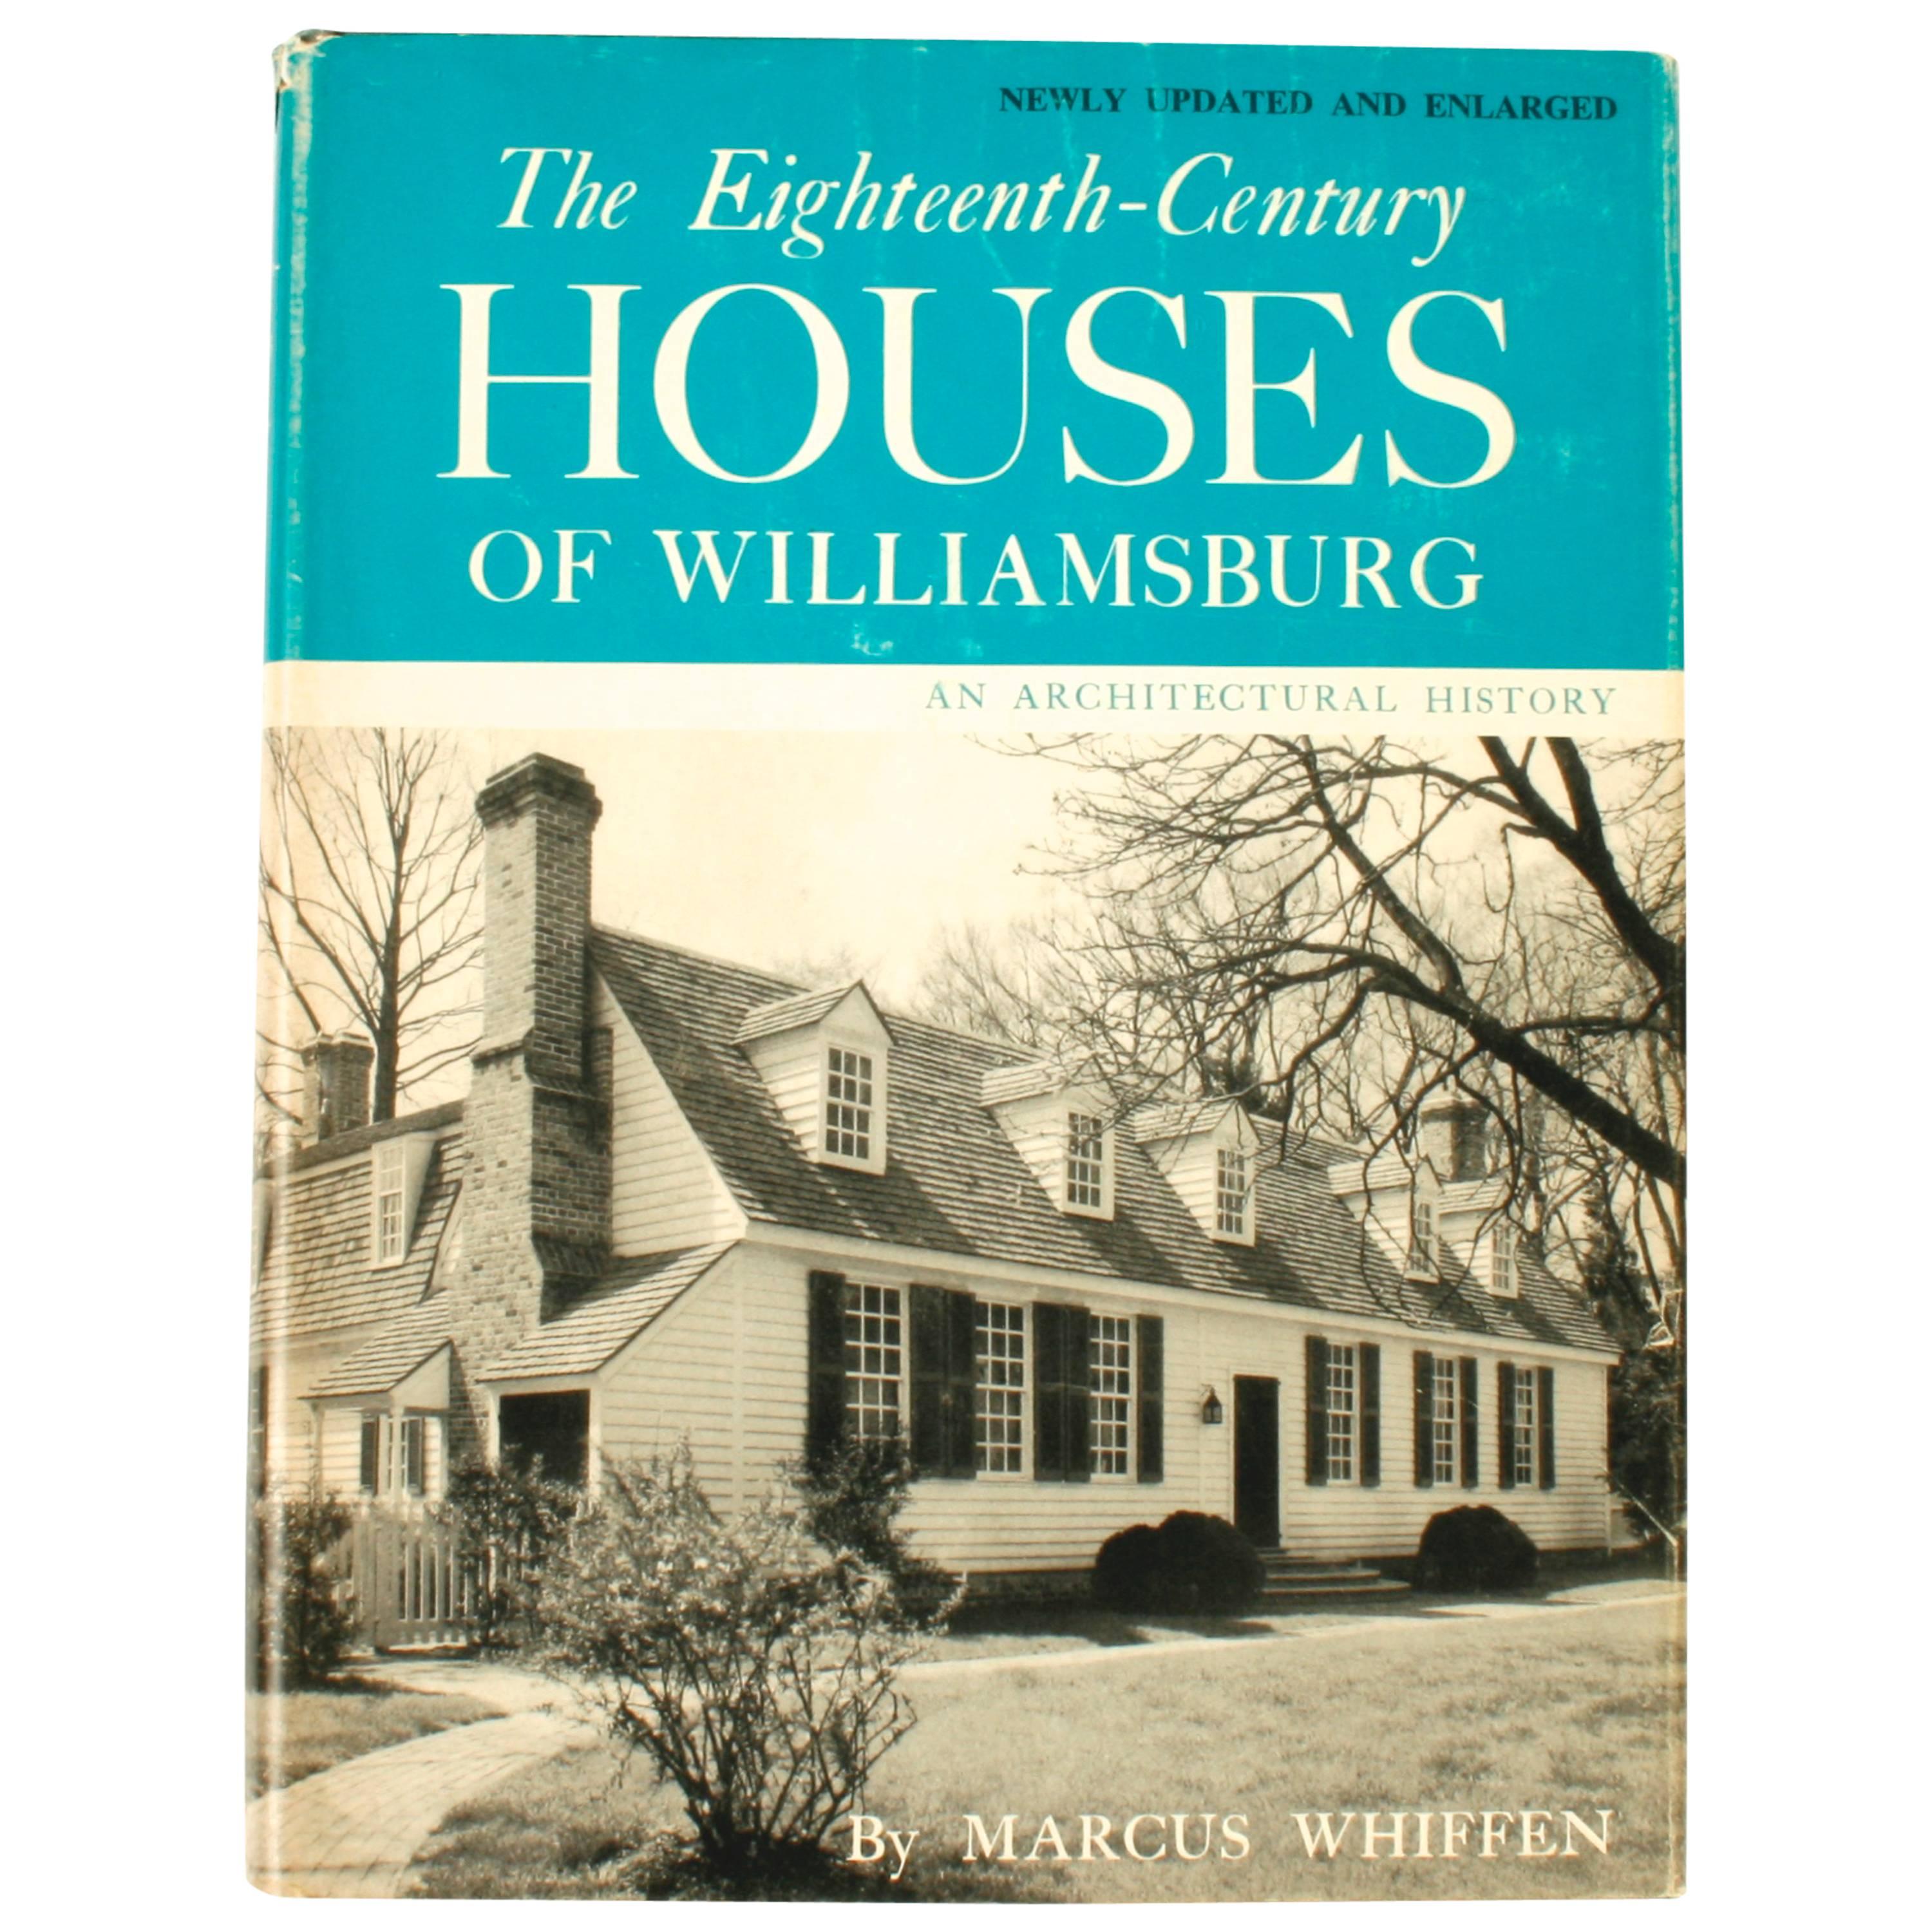 18th Century Houses of Williamsburg by Marcus Whiffen